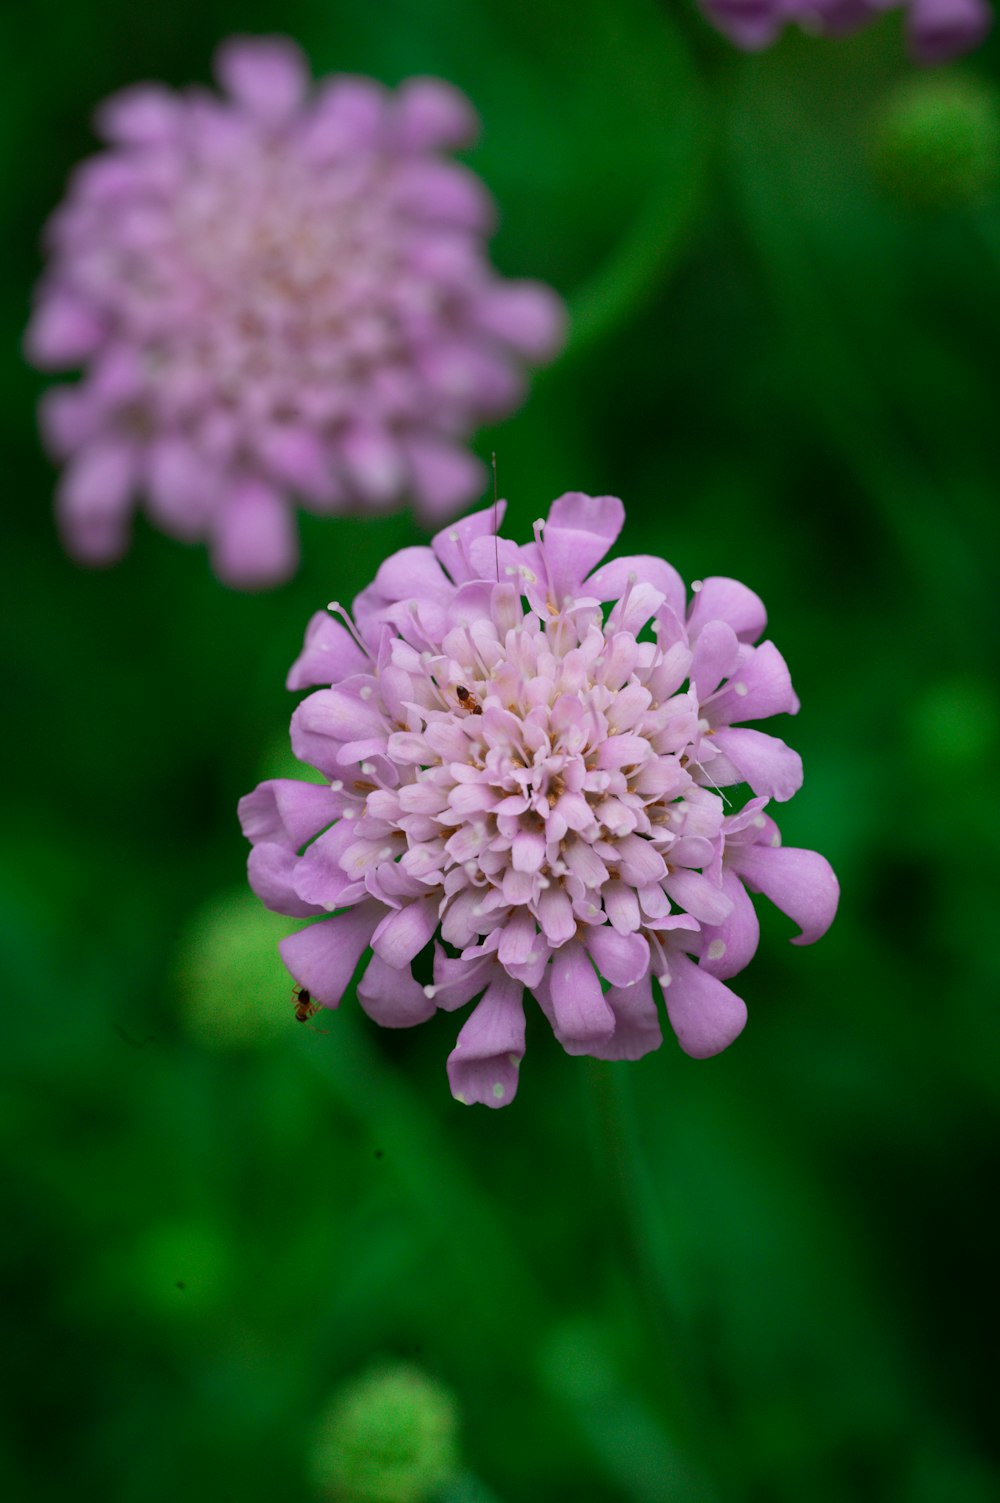 a close up of a pink flower on a green background